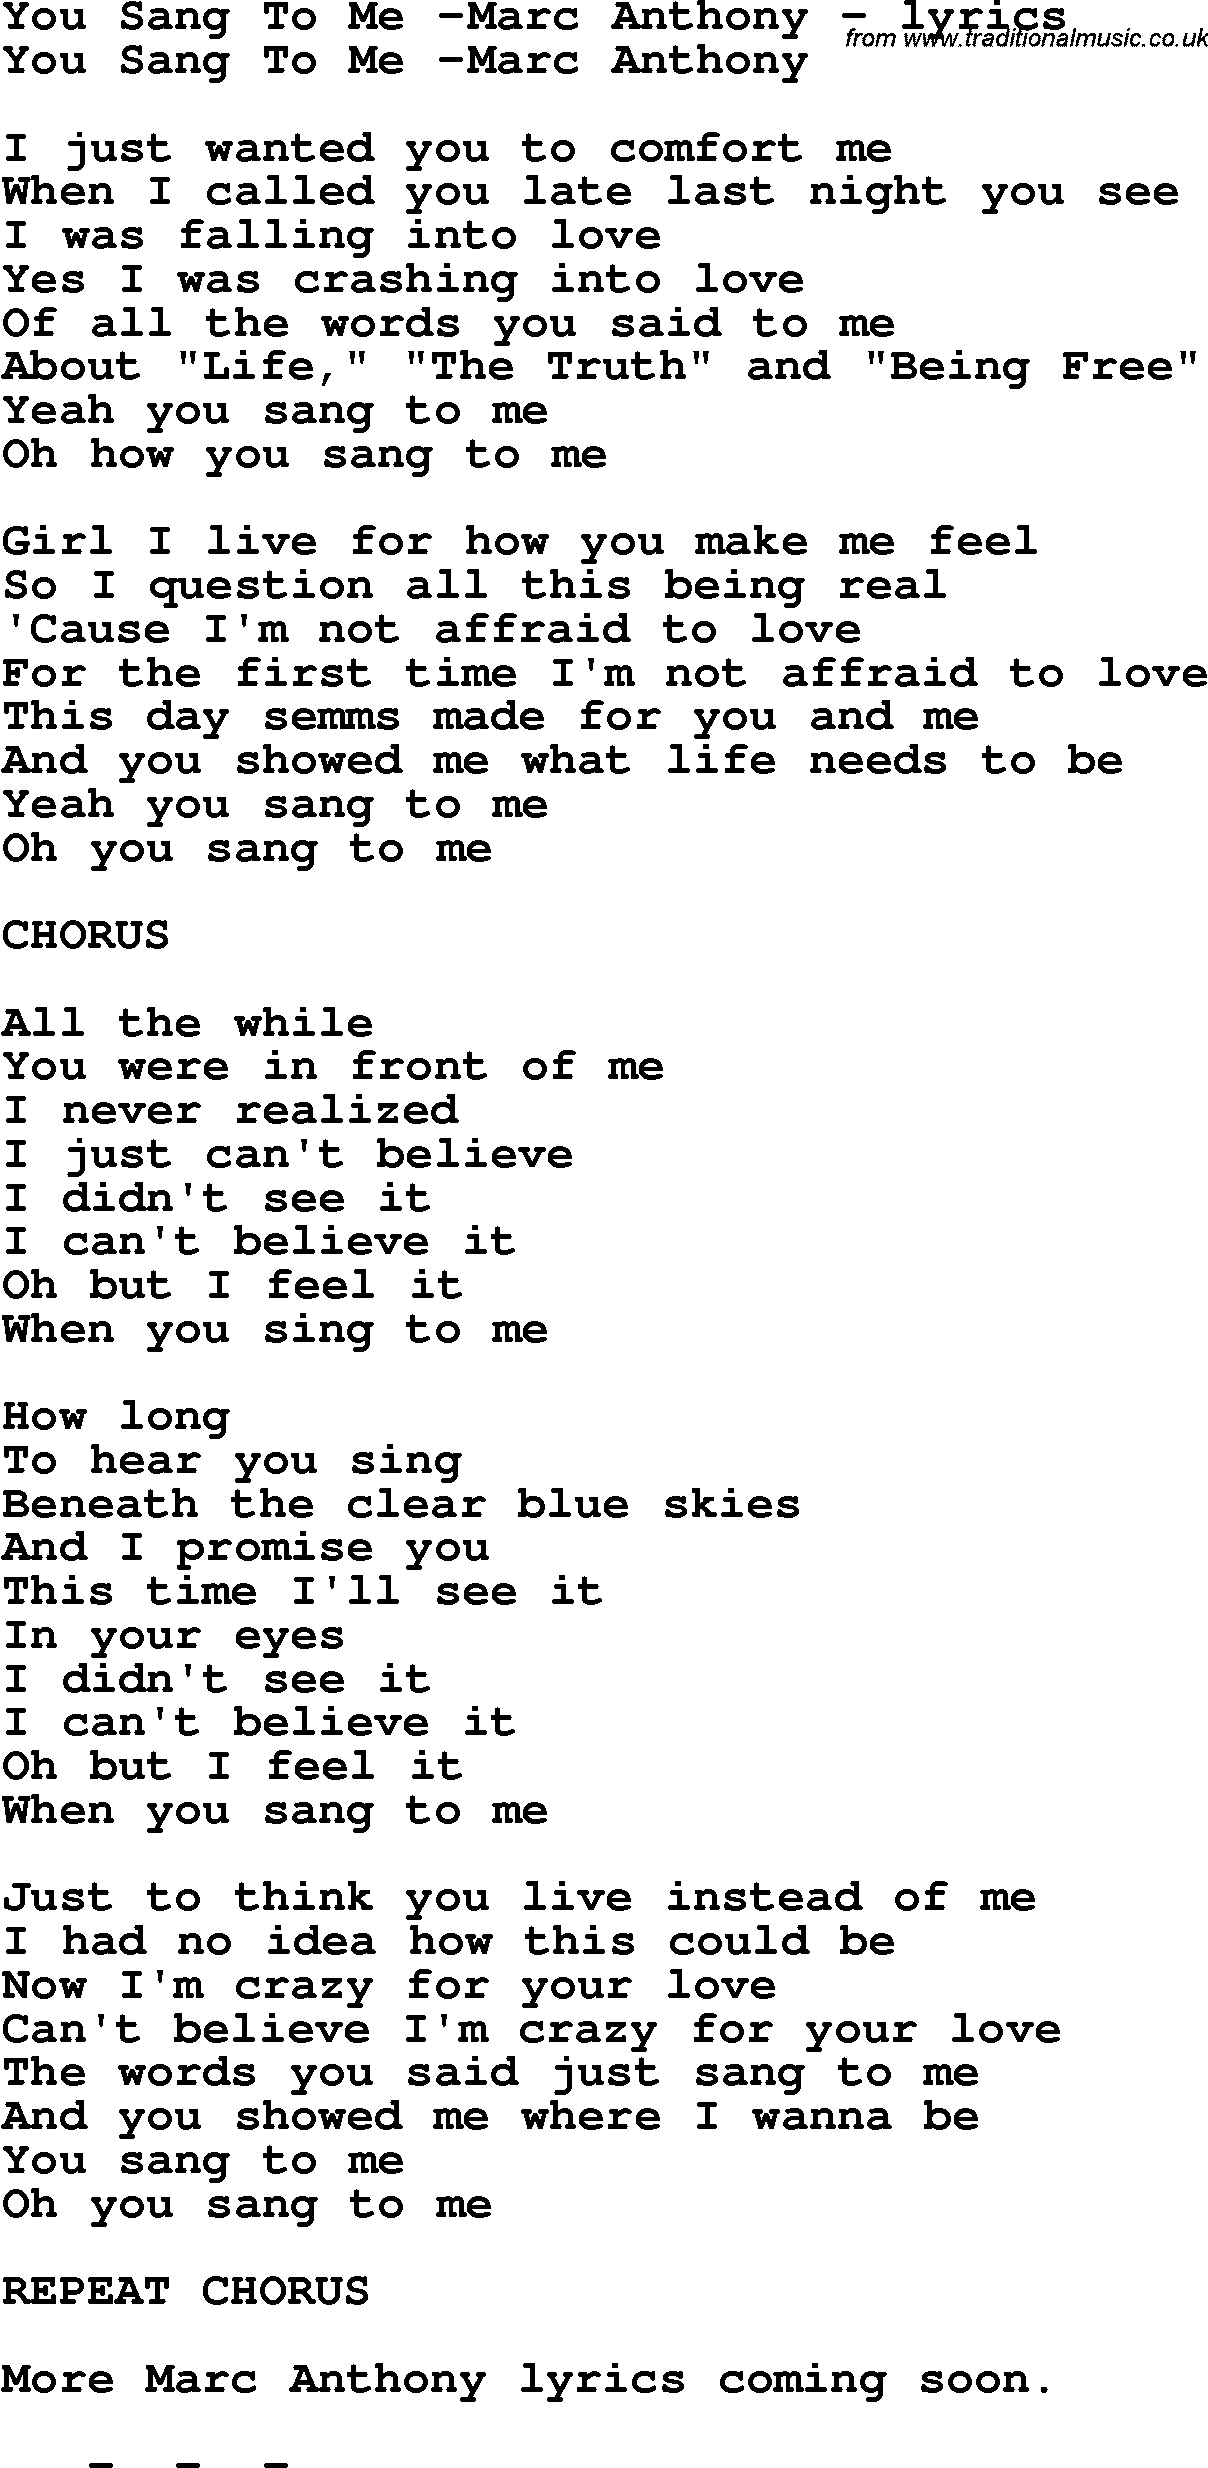 Love Song Lyrics for: You Sang To Me -Marc Anthony